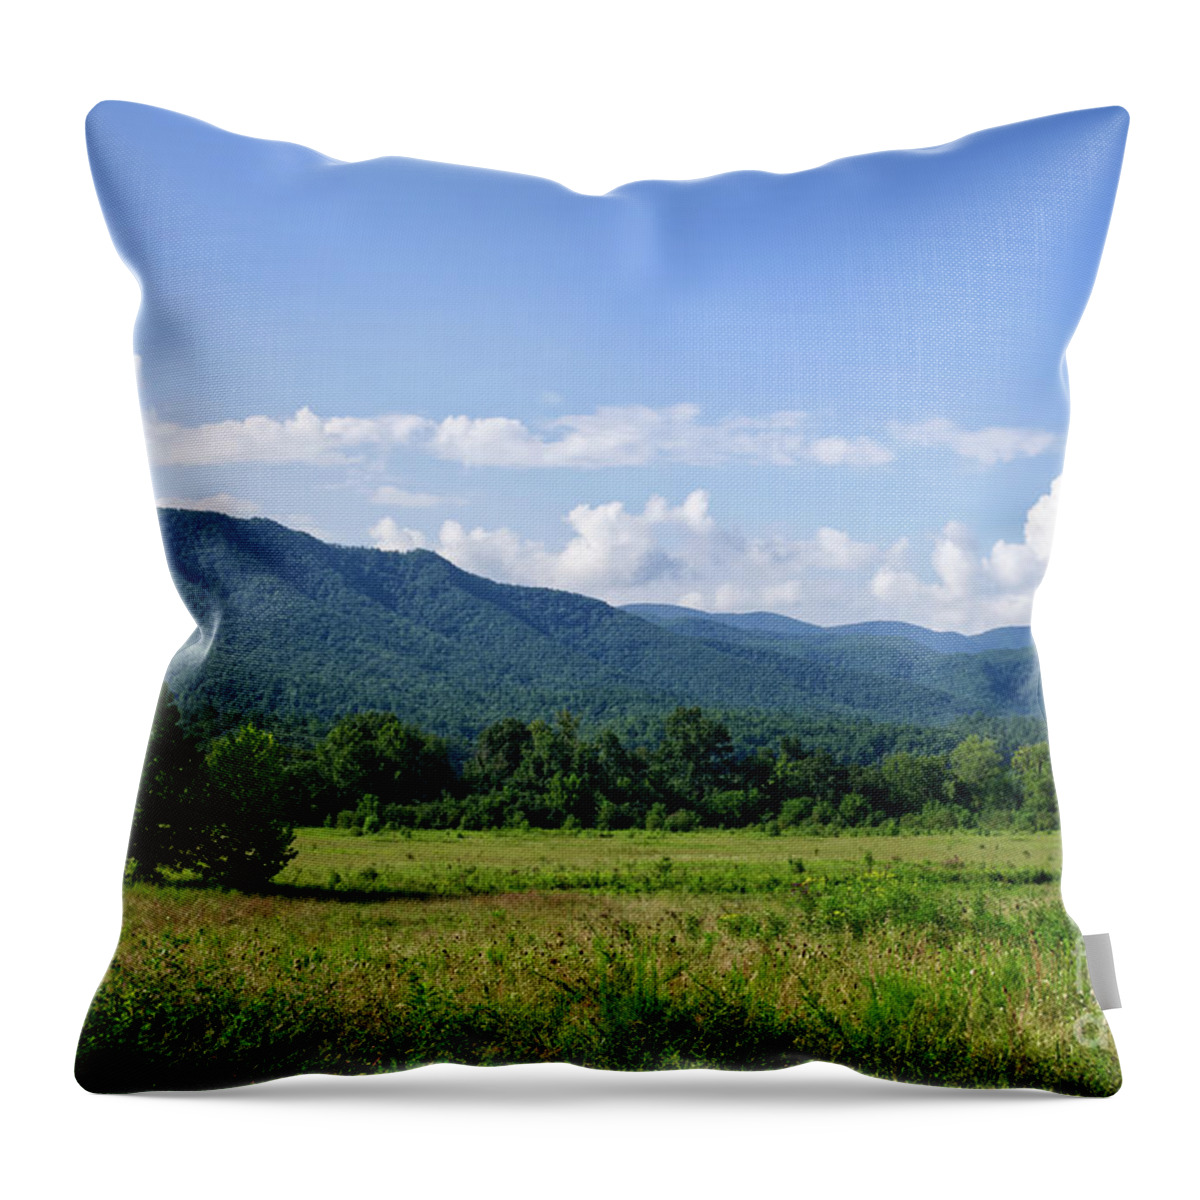 Tennessee Throw Pillow featuring the photograph Cades Cove Landscape 2 by Phil Perkins